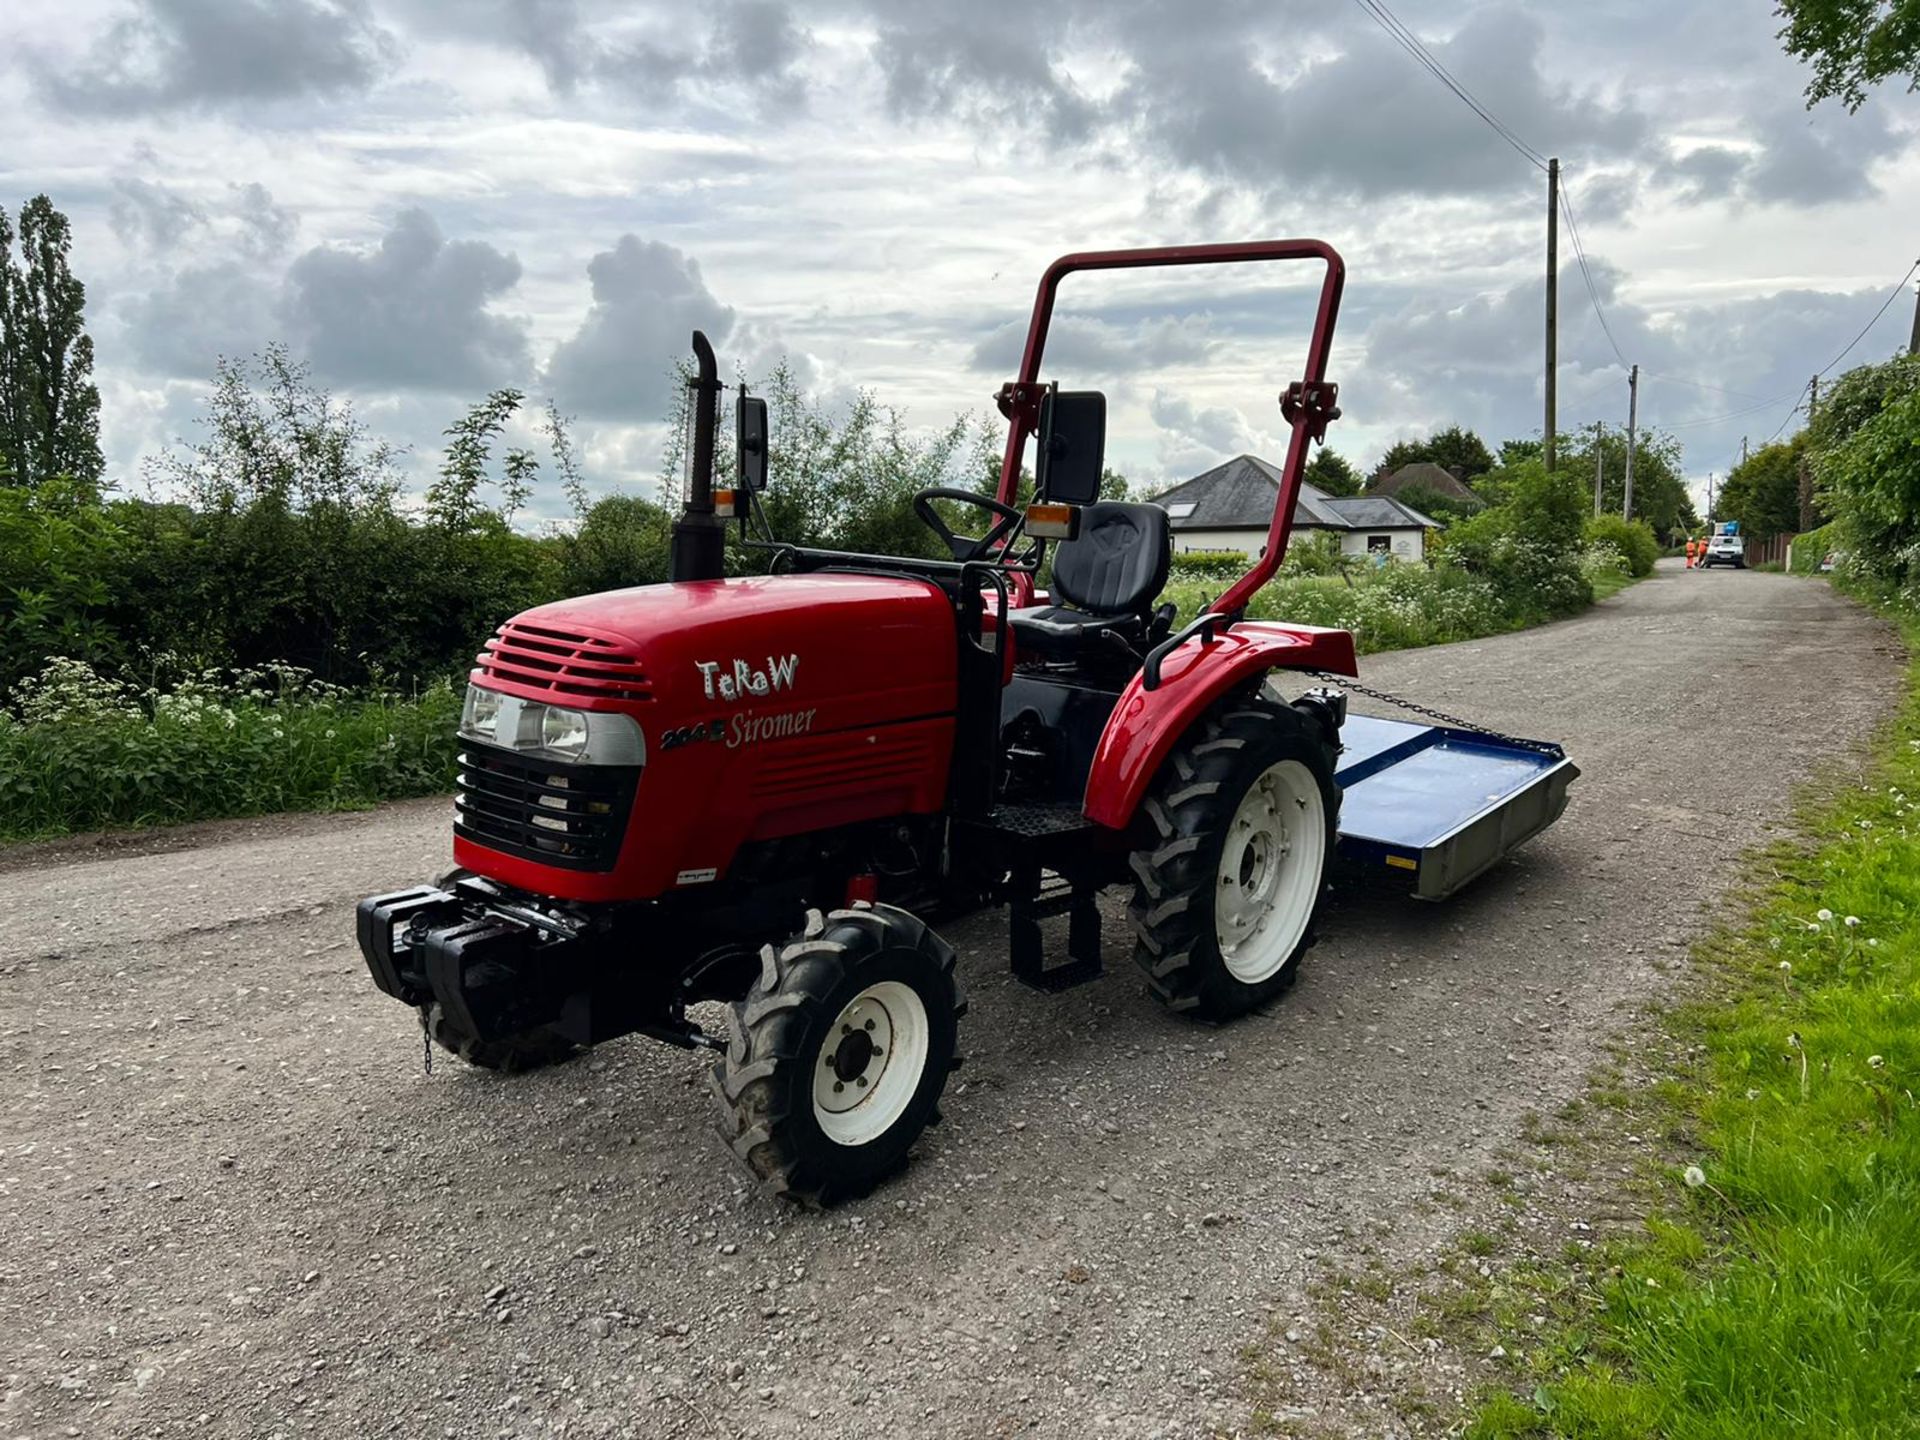 Siromer 204E 20HP 4WD Compact Tractor With 5FT Beaco Grass Topper - 68 Plate "PLUS VAT" - Image 2 of 22